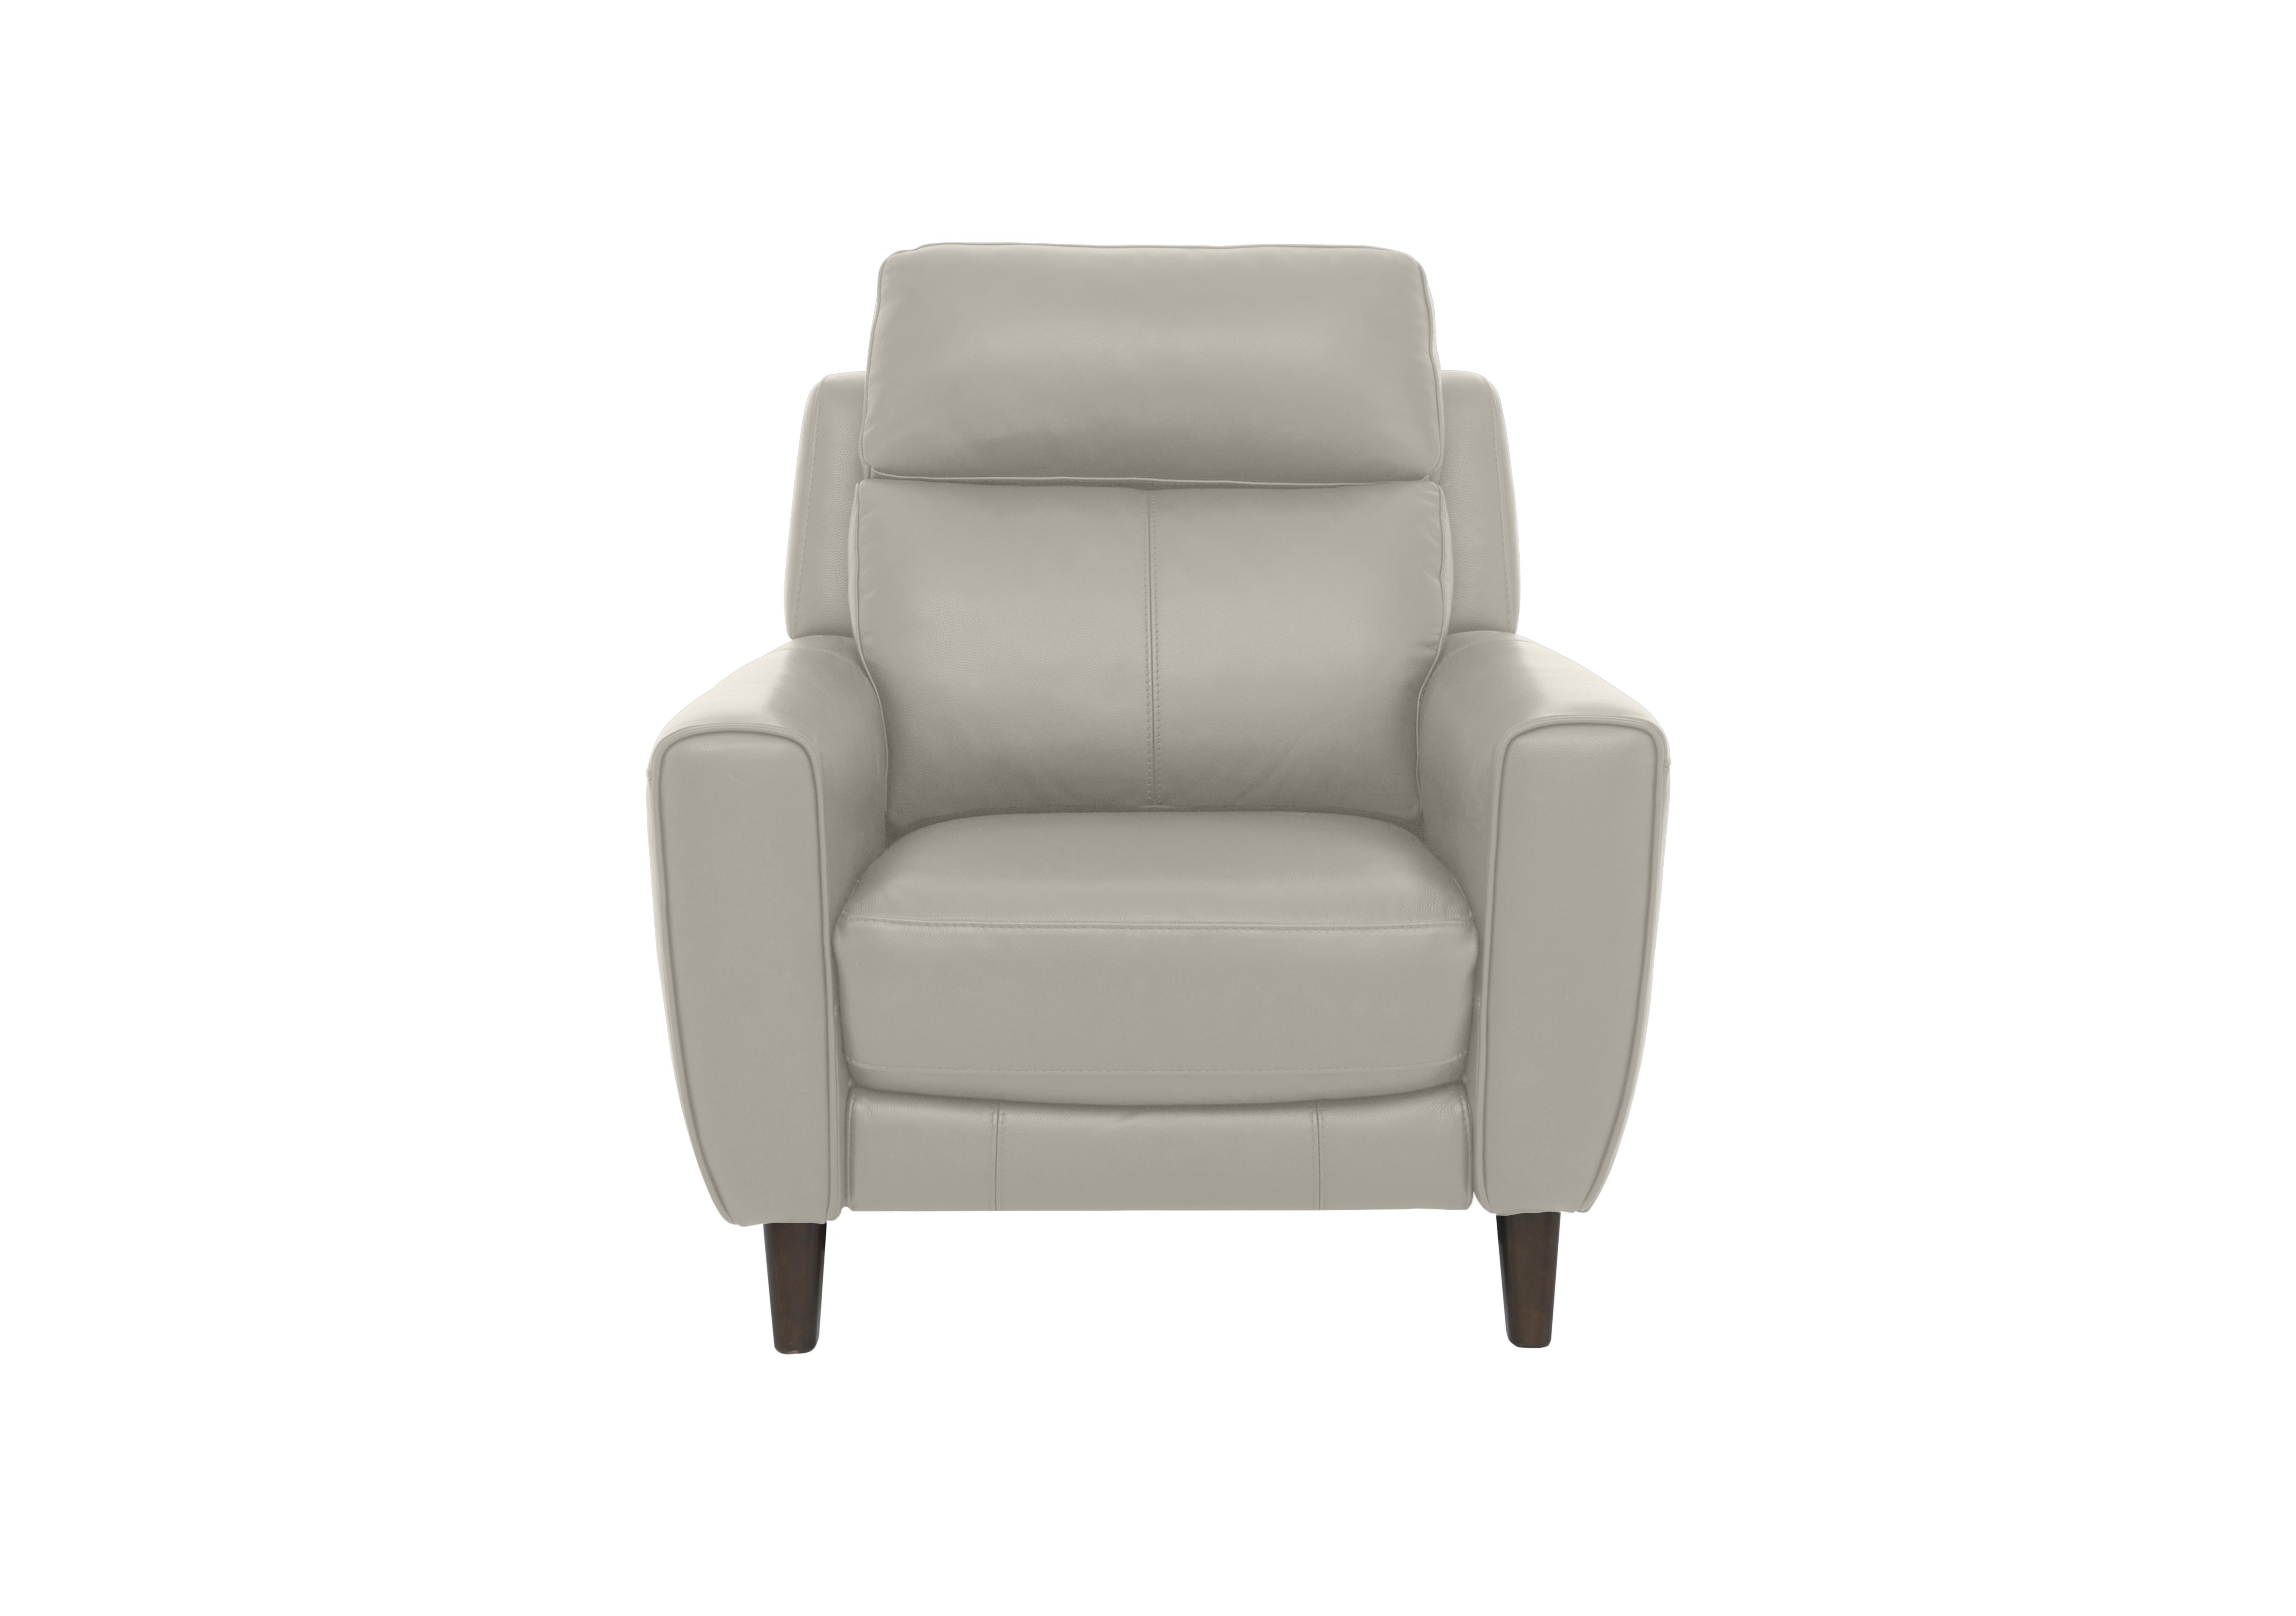 Zen Leather Power Recliner Chair with Power Headrest in Bx-251e Grey on Furniture Village